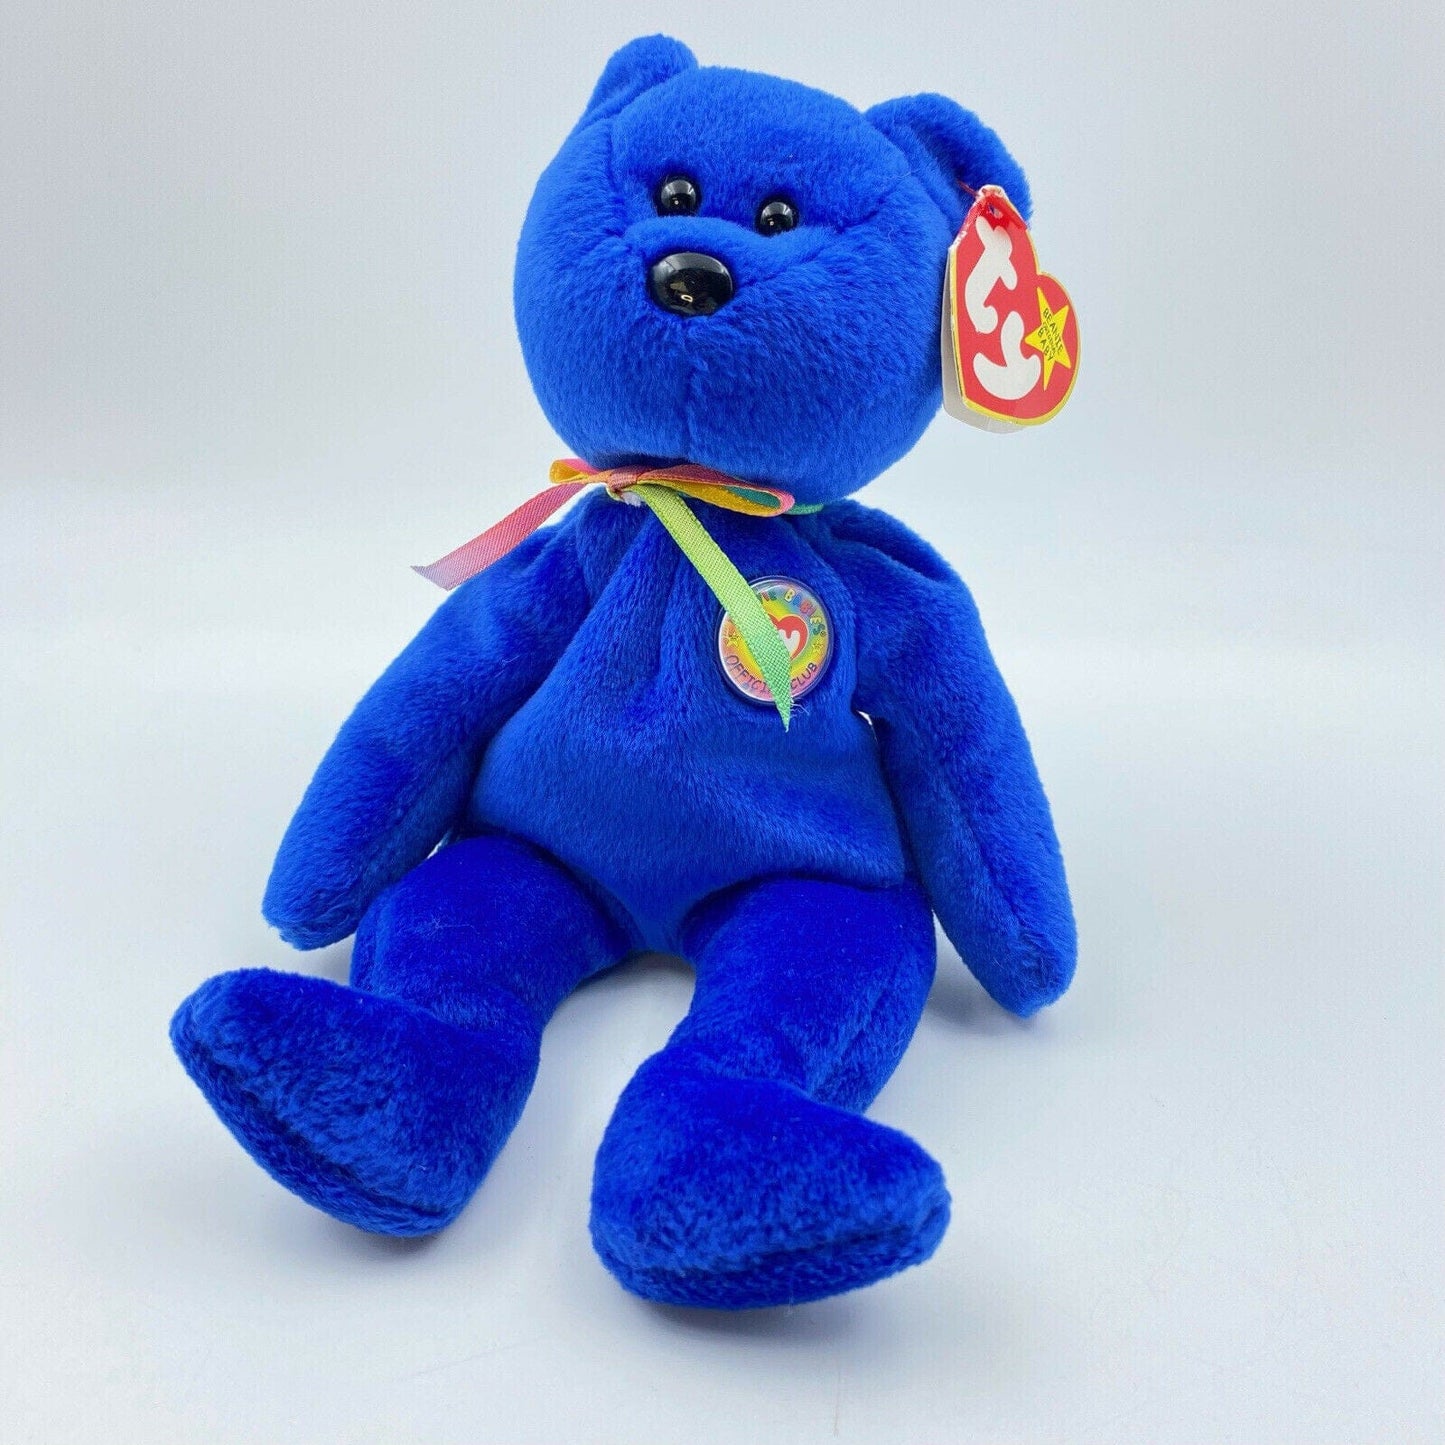 Ty Original Beanie Babies - “Clubby” The Bear - 1998 - EXCELLENT Condition